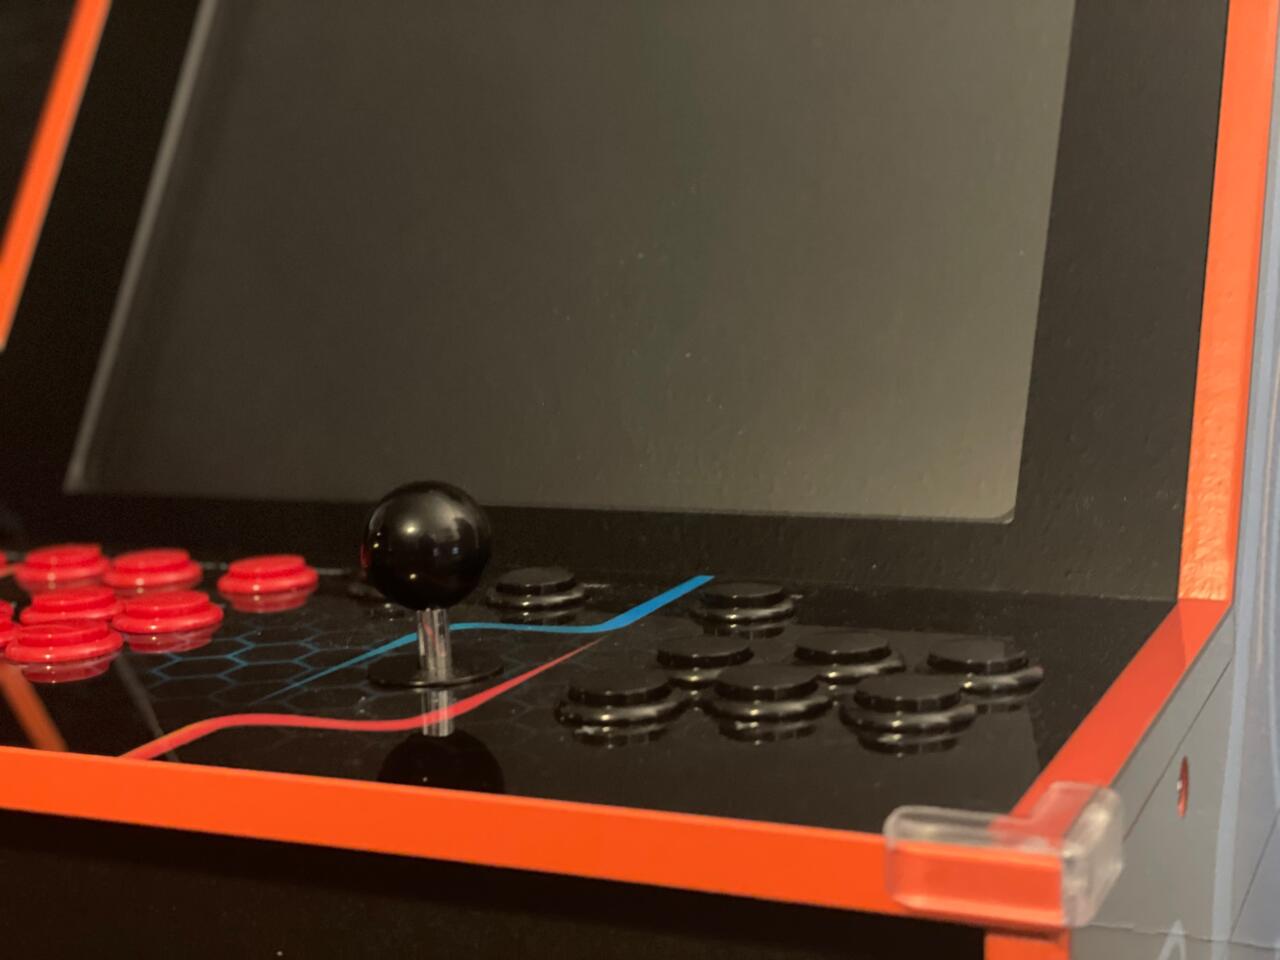 The iiRcade has two premium joysticks and six clicky buttons for each